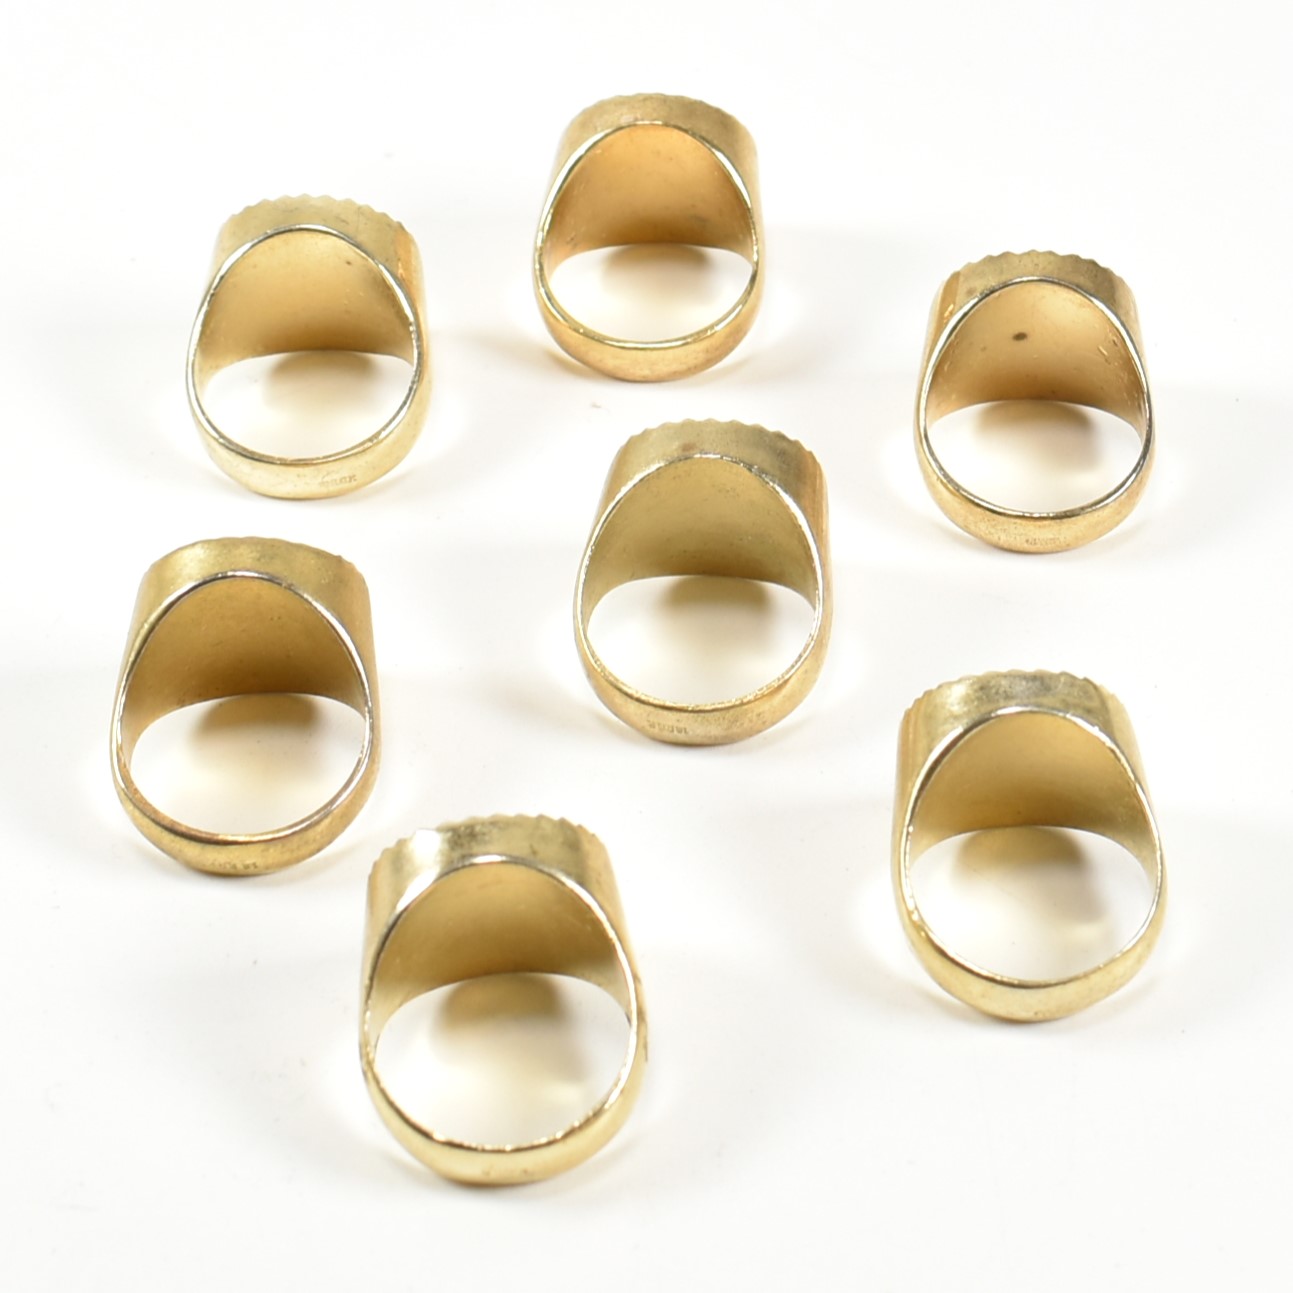 SIX GOLD TONE METAL FAUX SOVEREIGN RINGS - Image 2 of 6